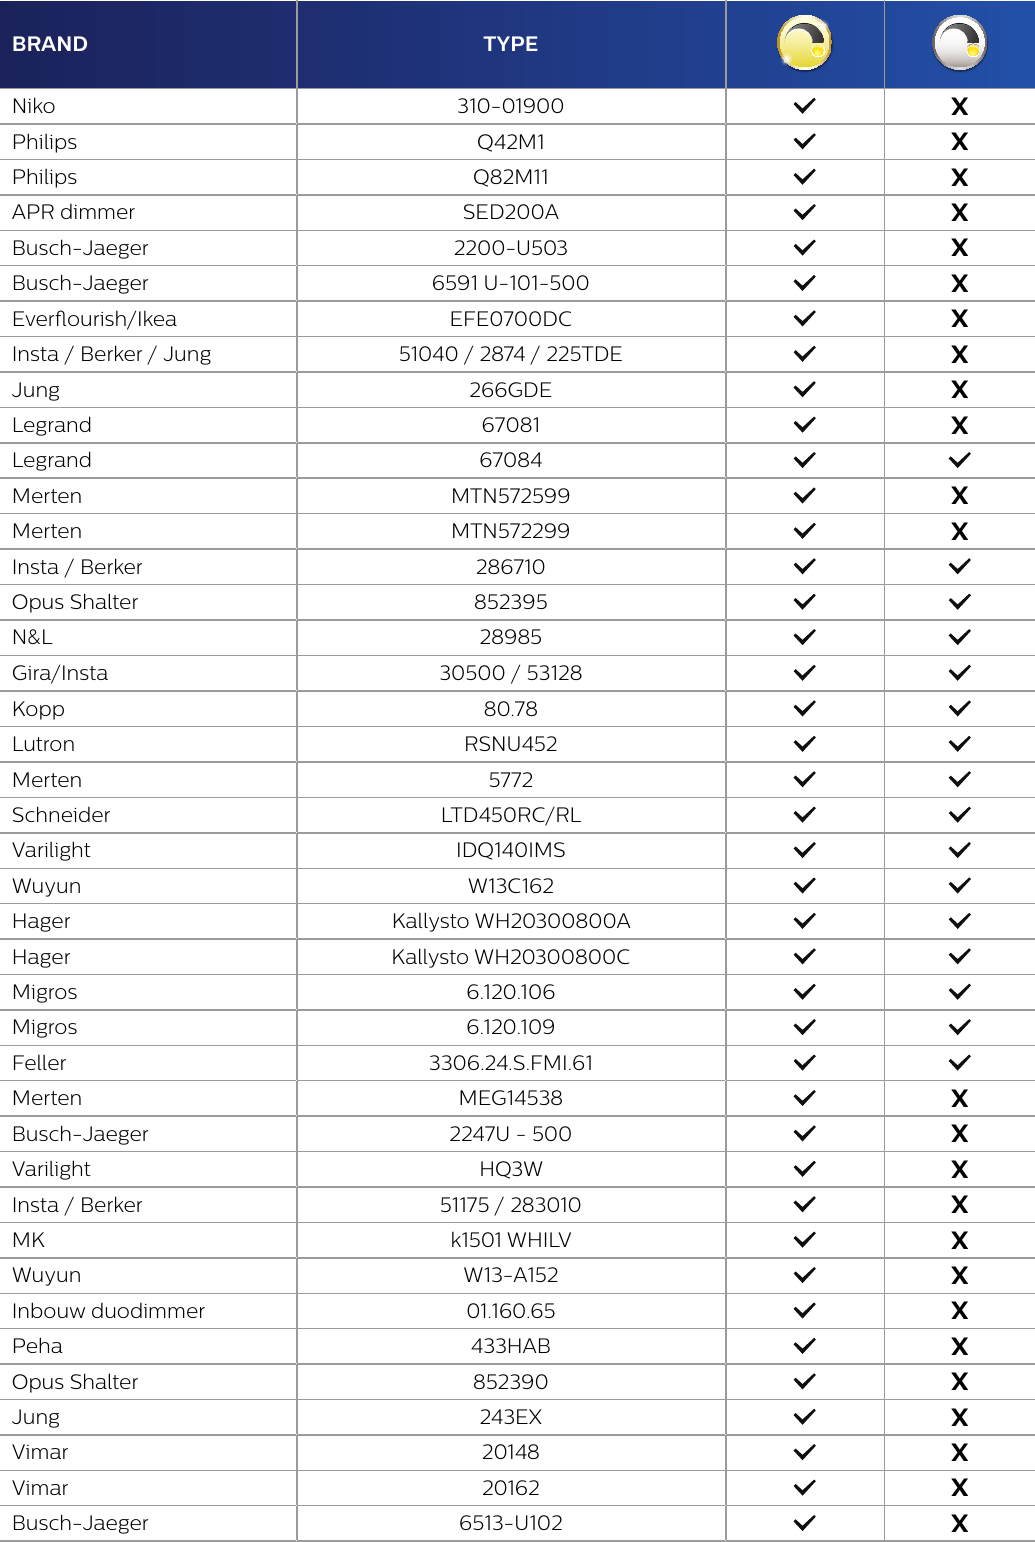 Page 2 of 4 - Philips  View The Dimmer Compatibility List For LED Lamps (PDF) ODLI20161229 001-UPD-en GB-Luminaires Dimmerlist